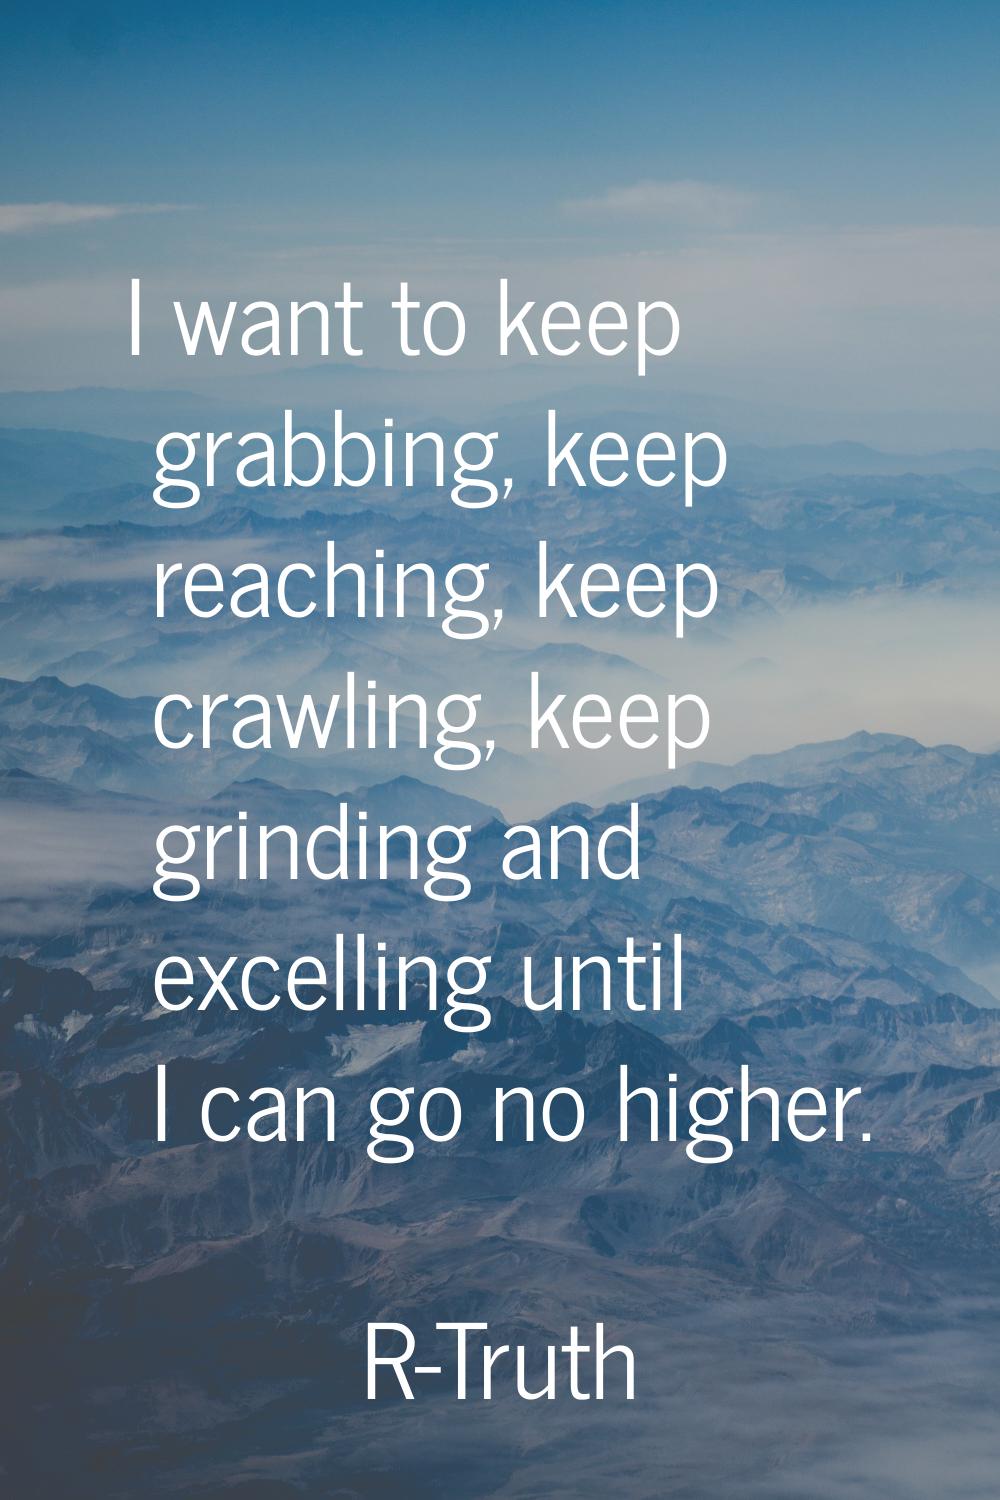 I want to keep grabbing, keep reaching, keep crawling, keep grinding and excelling until I can go n